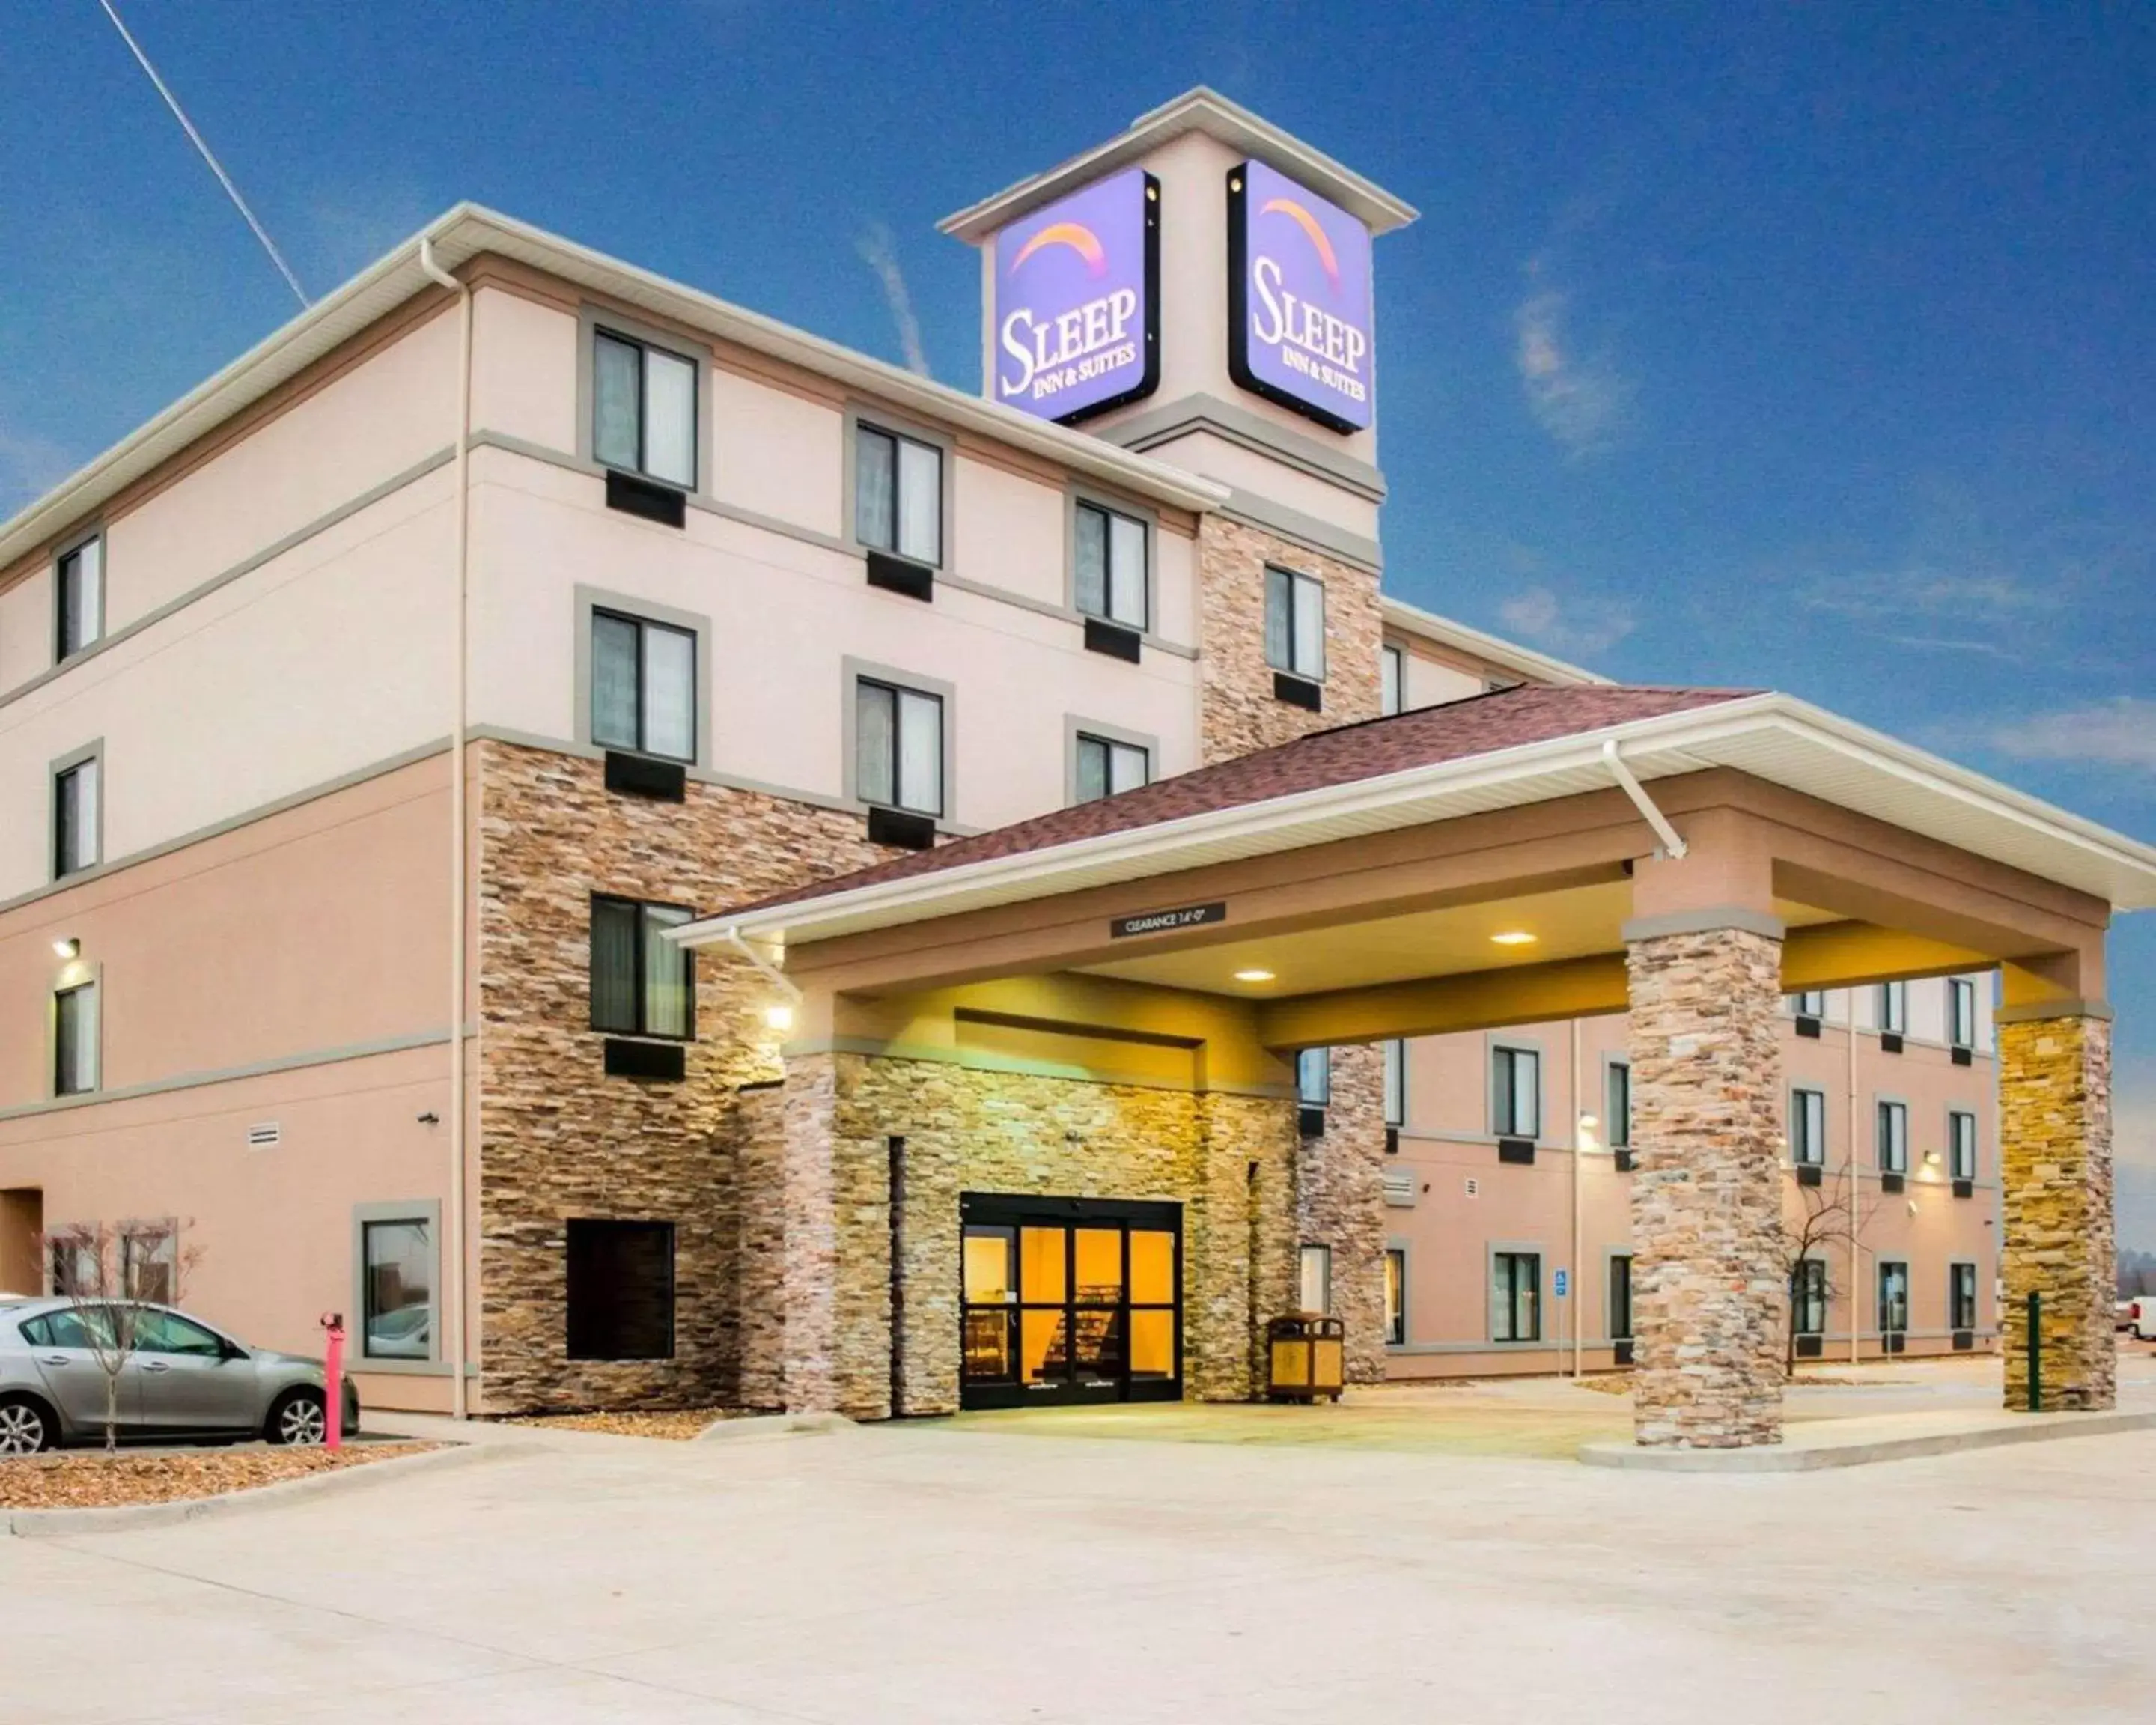 Property Building in Sleep Inn & Suites Fort Campbell